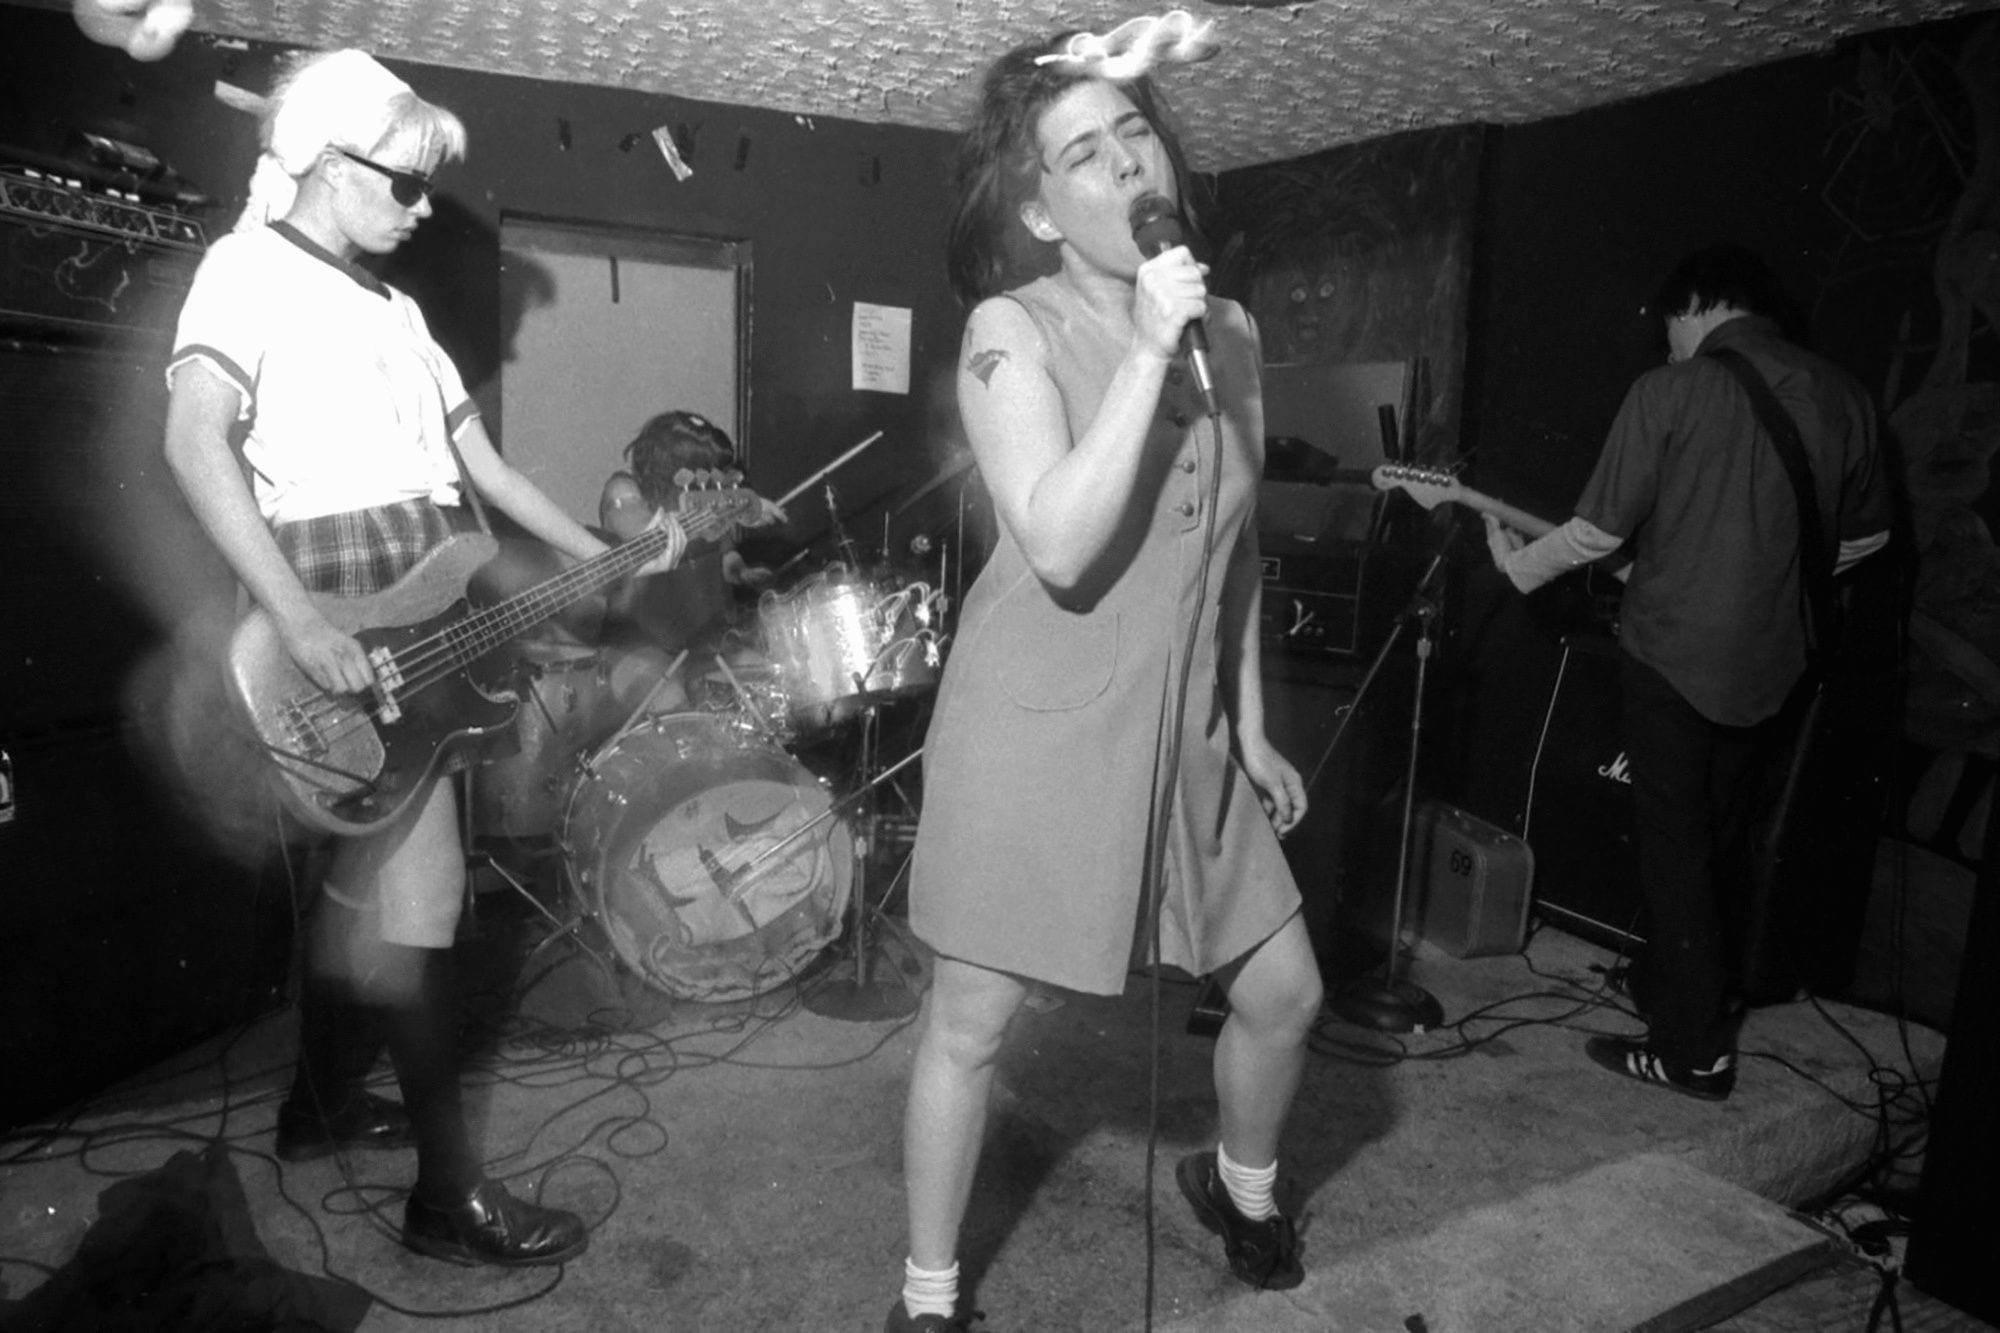 How Going Underground Kept Punk From “Breaking” in 1991